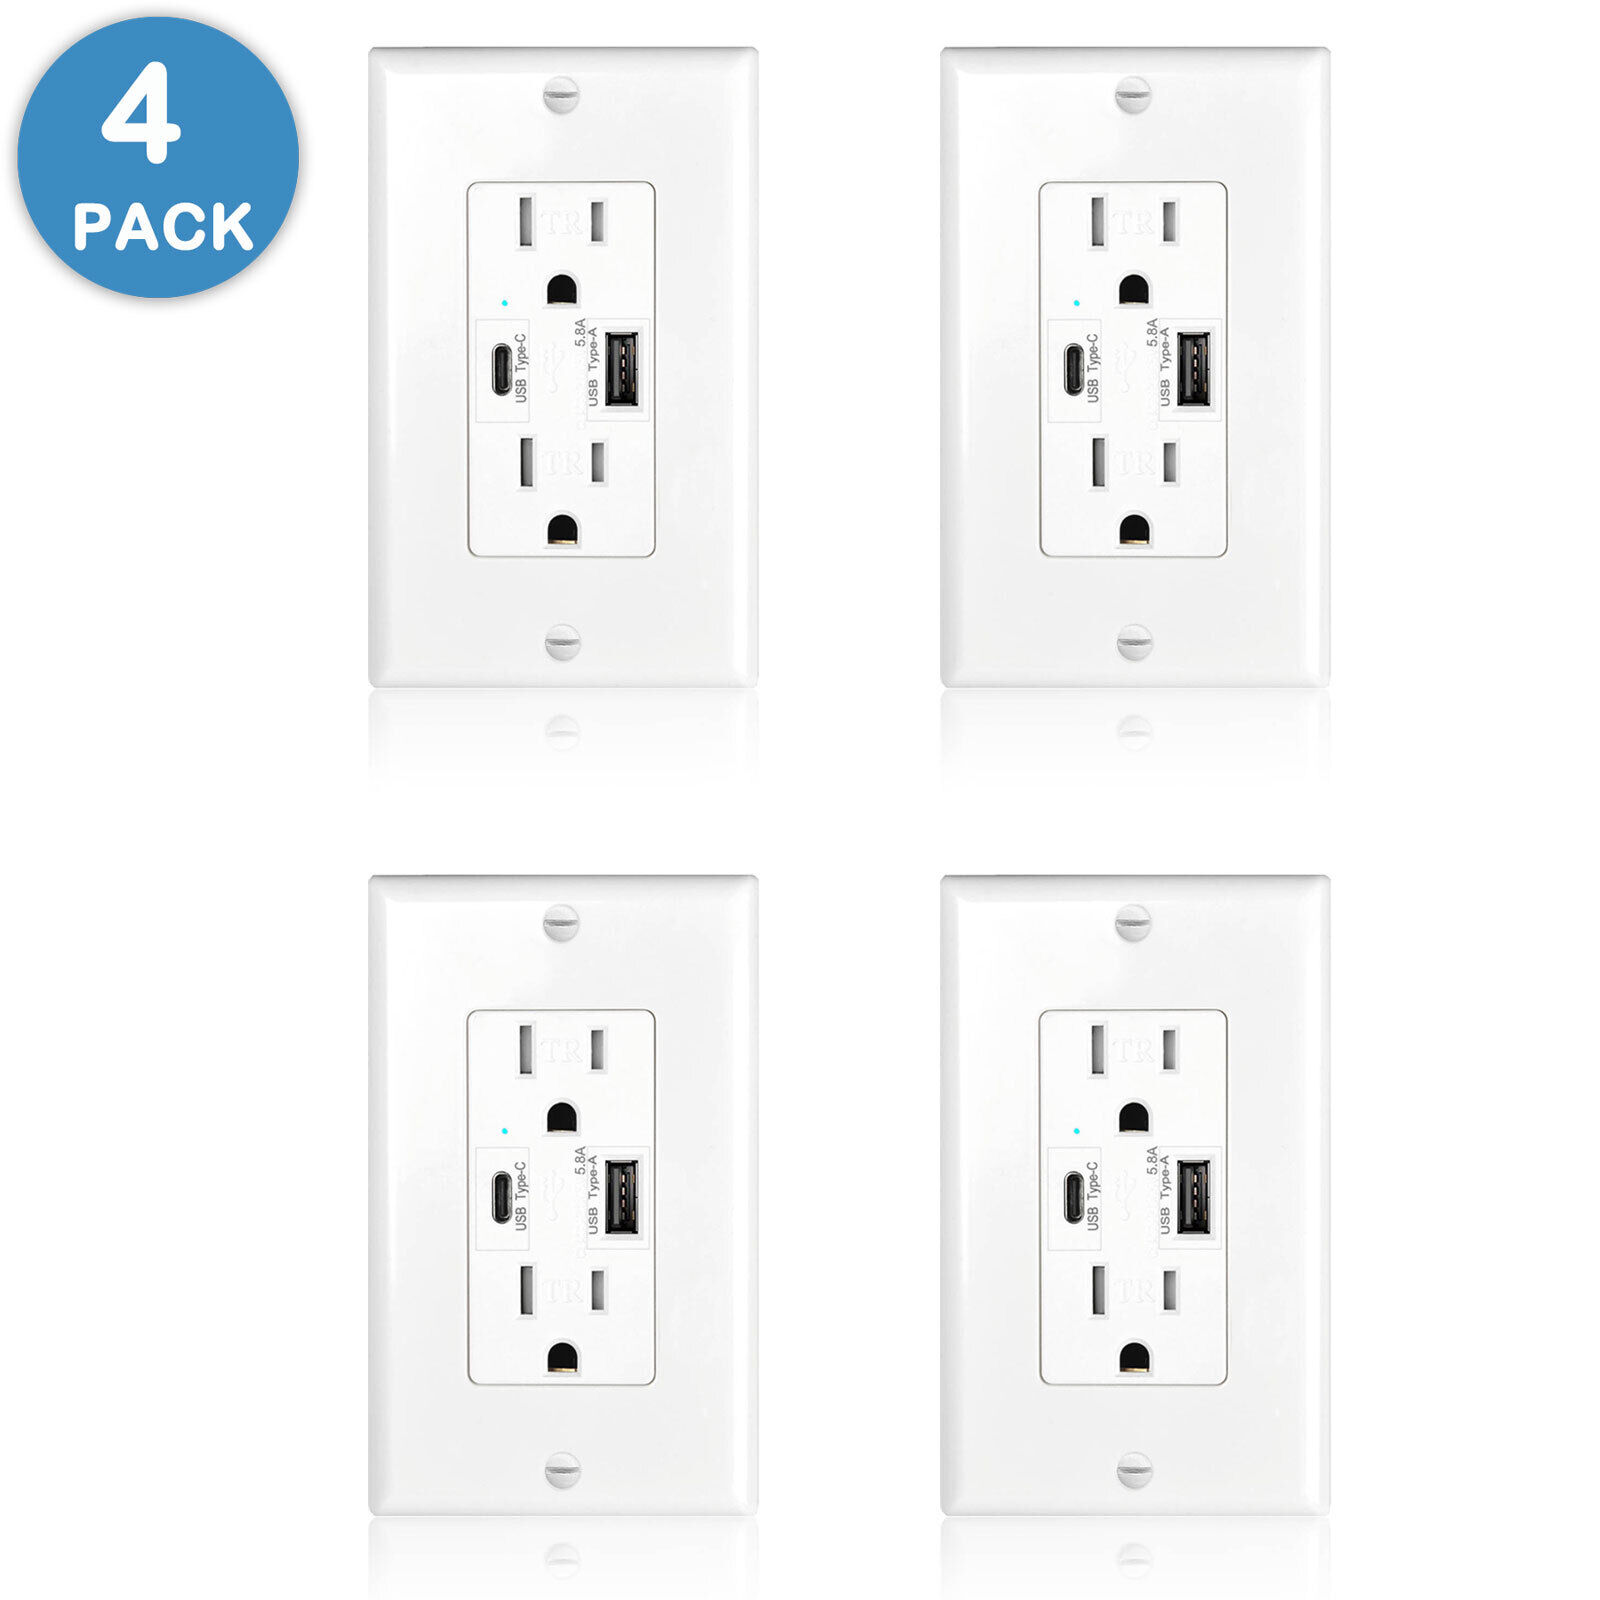 4PACK High Speed 5.8A Dual USB Type-C Wall Outlet Tamper Resistant Receptacle US